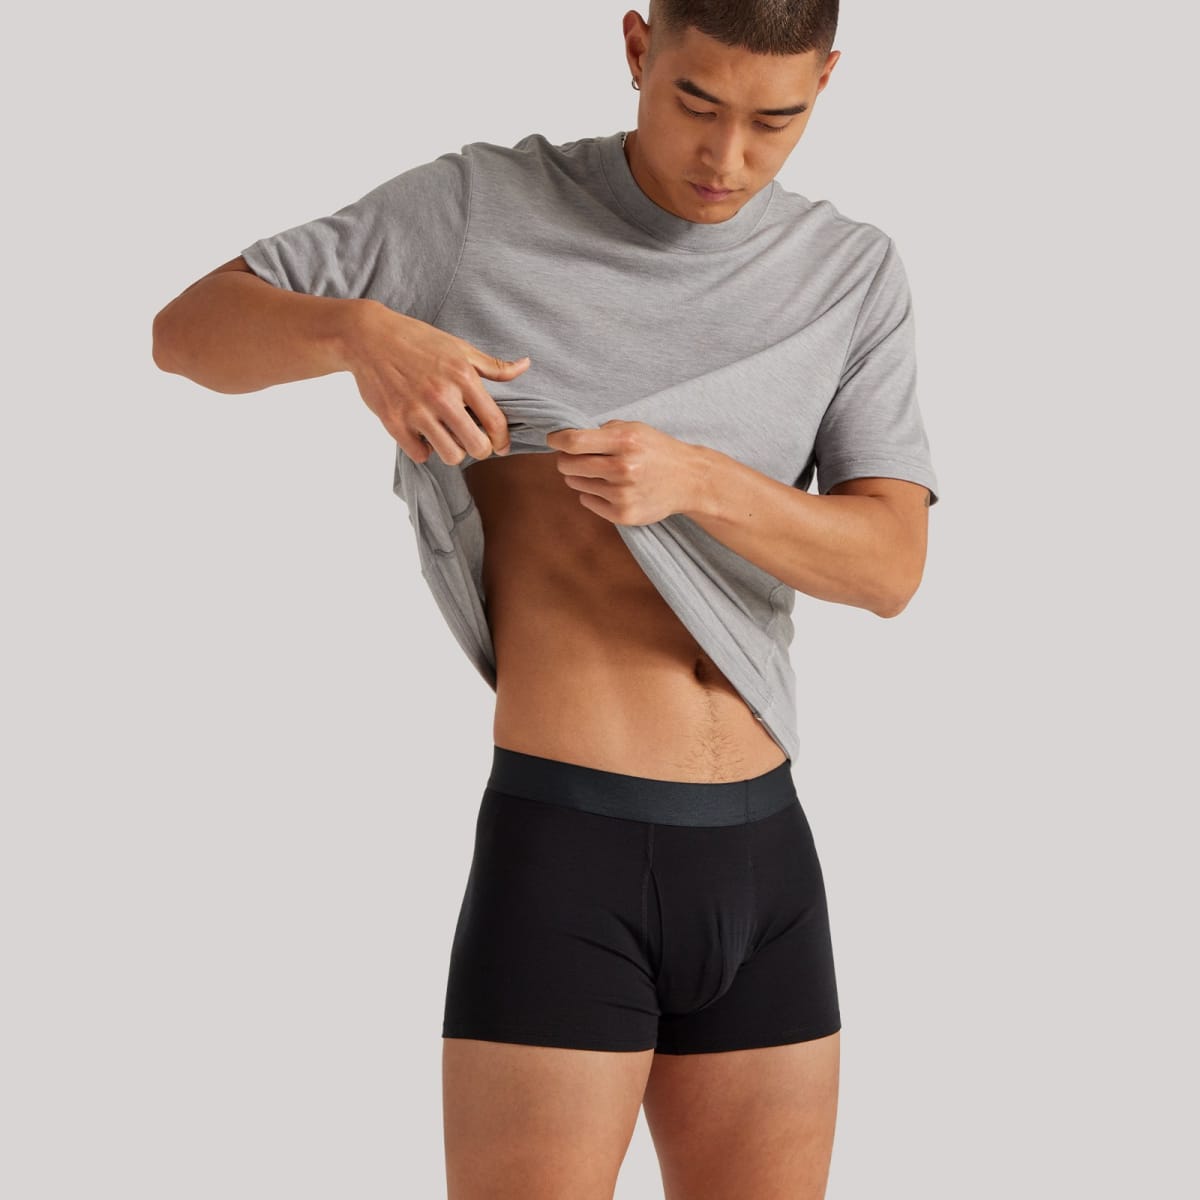 13 Brands that protect your best parts | Ethical Underwear for men.